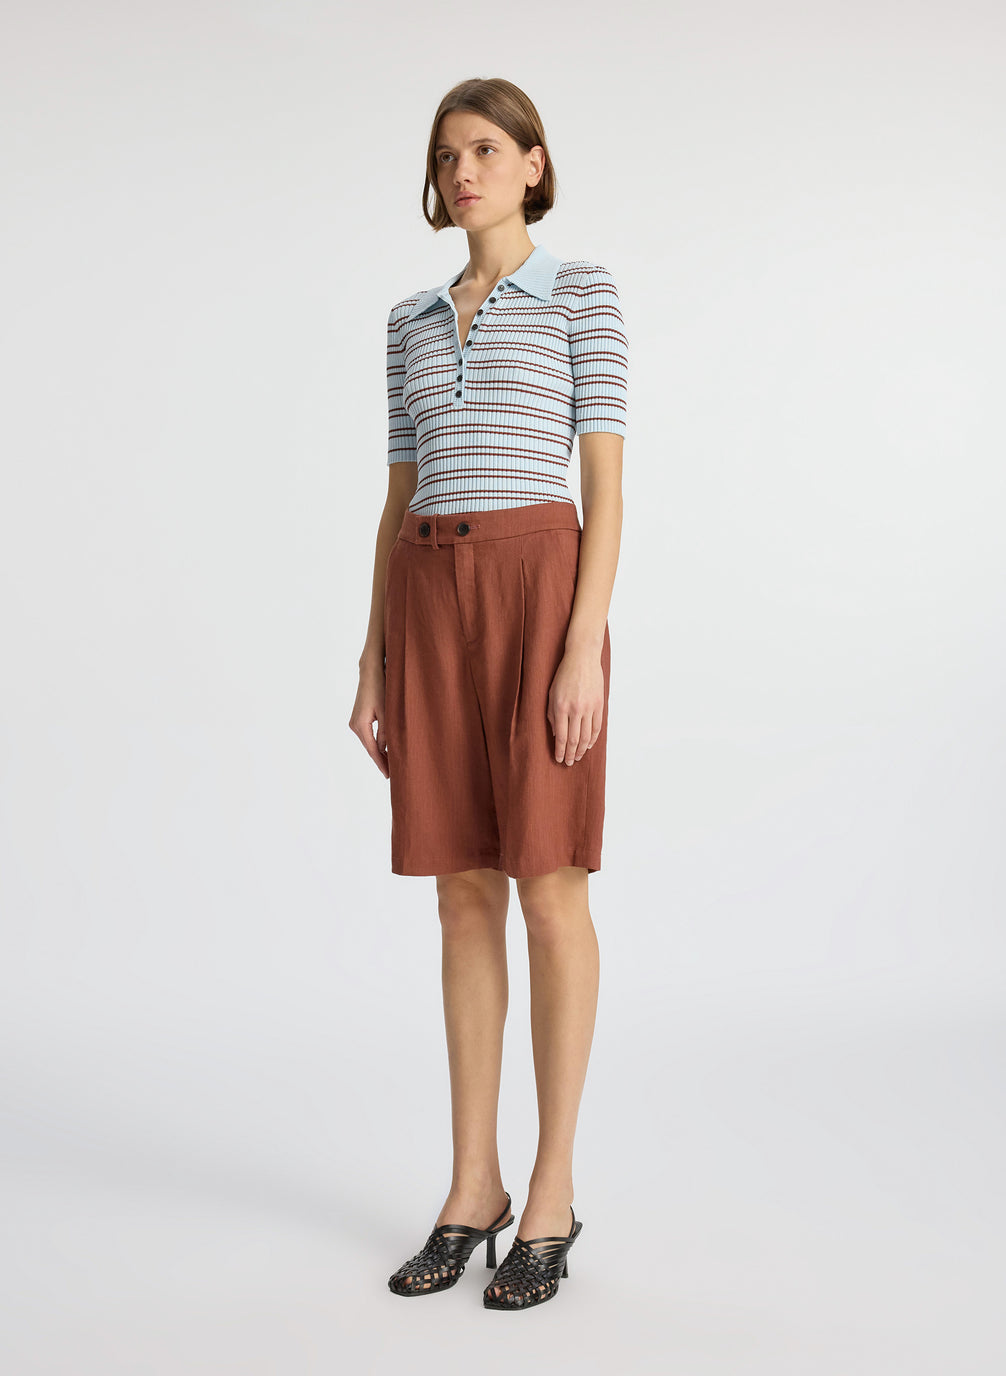 side view of woman wearing blue and brown striped shirt and brown shorts